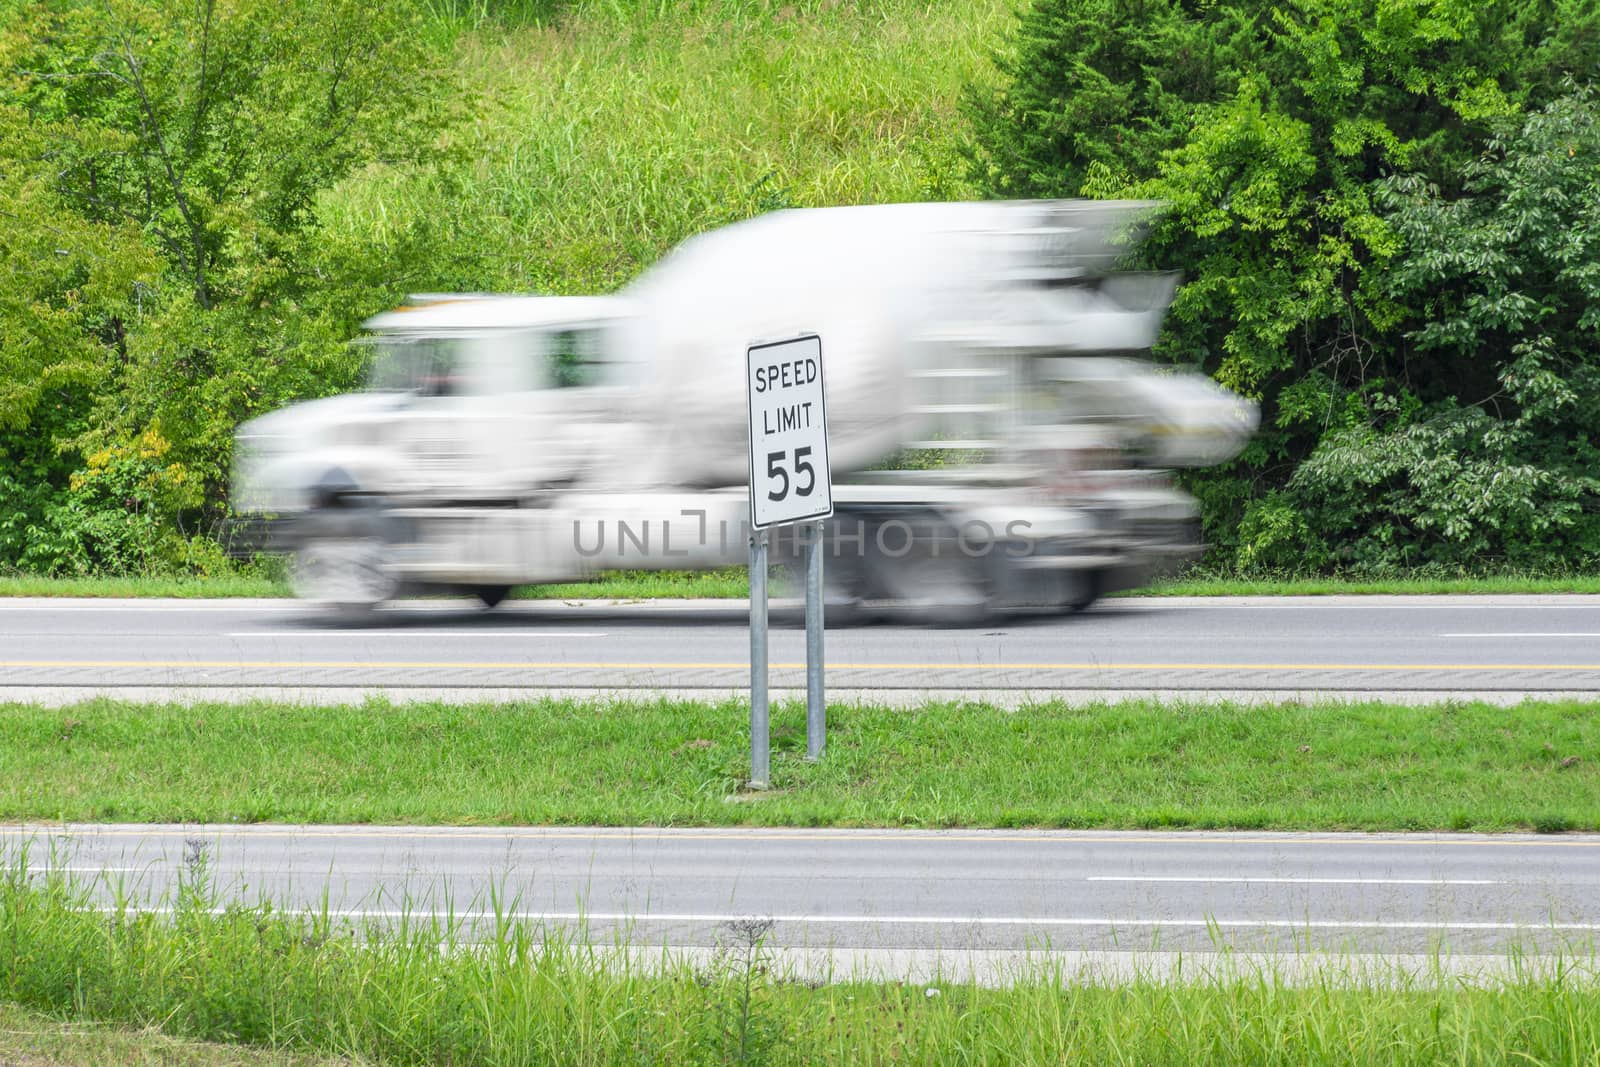 Speeding Concrete Truck Races Past Speed Limit Sign by stockbuster1